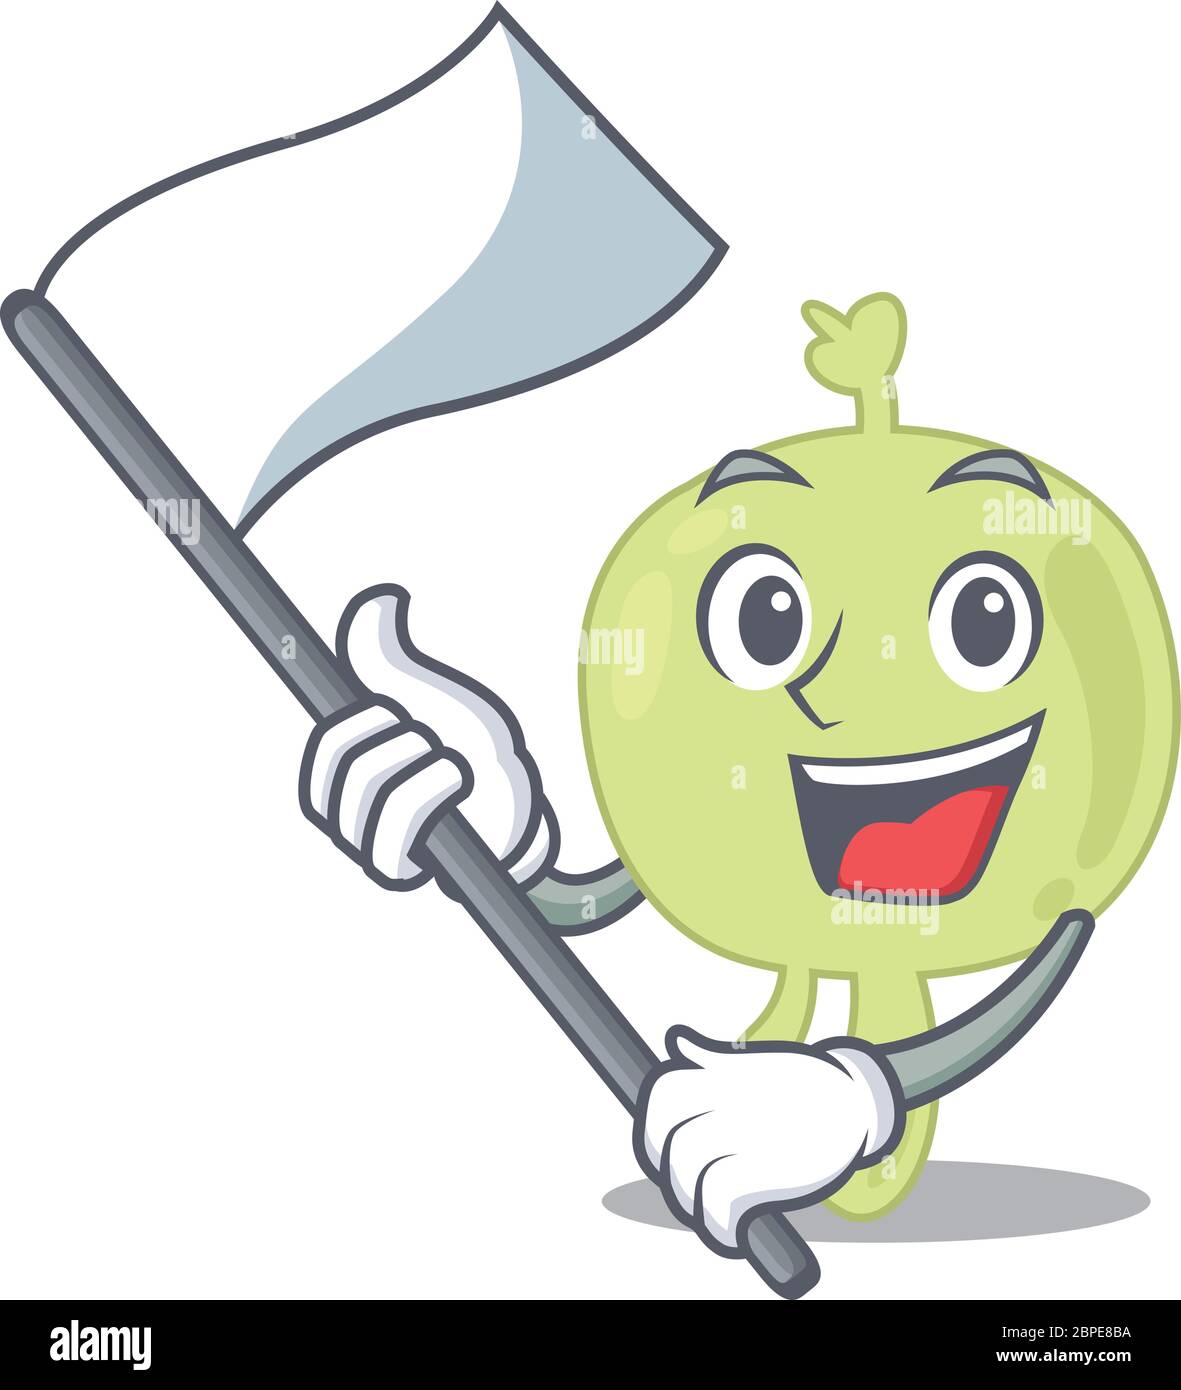 A heroic lymph node mascot character design with white flag Stock Vector